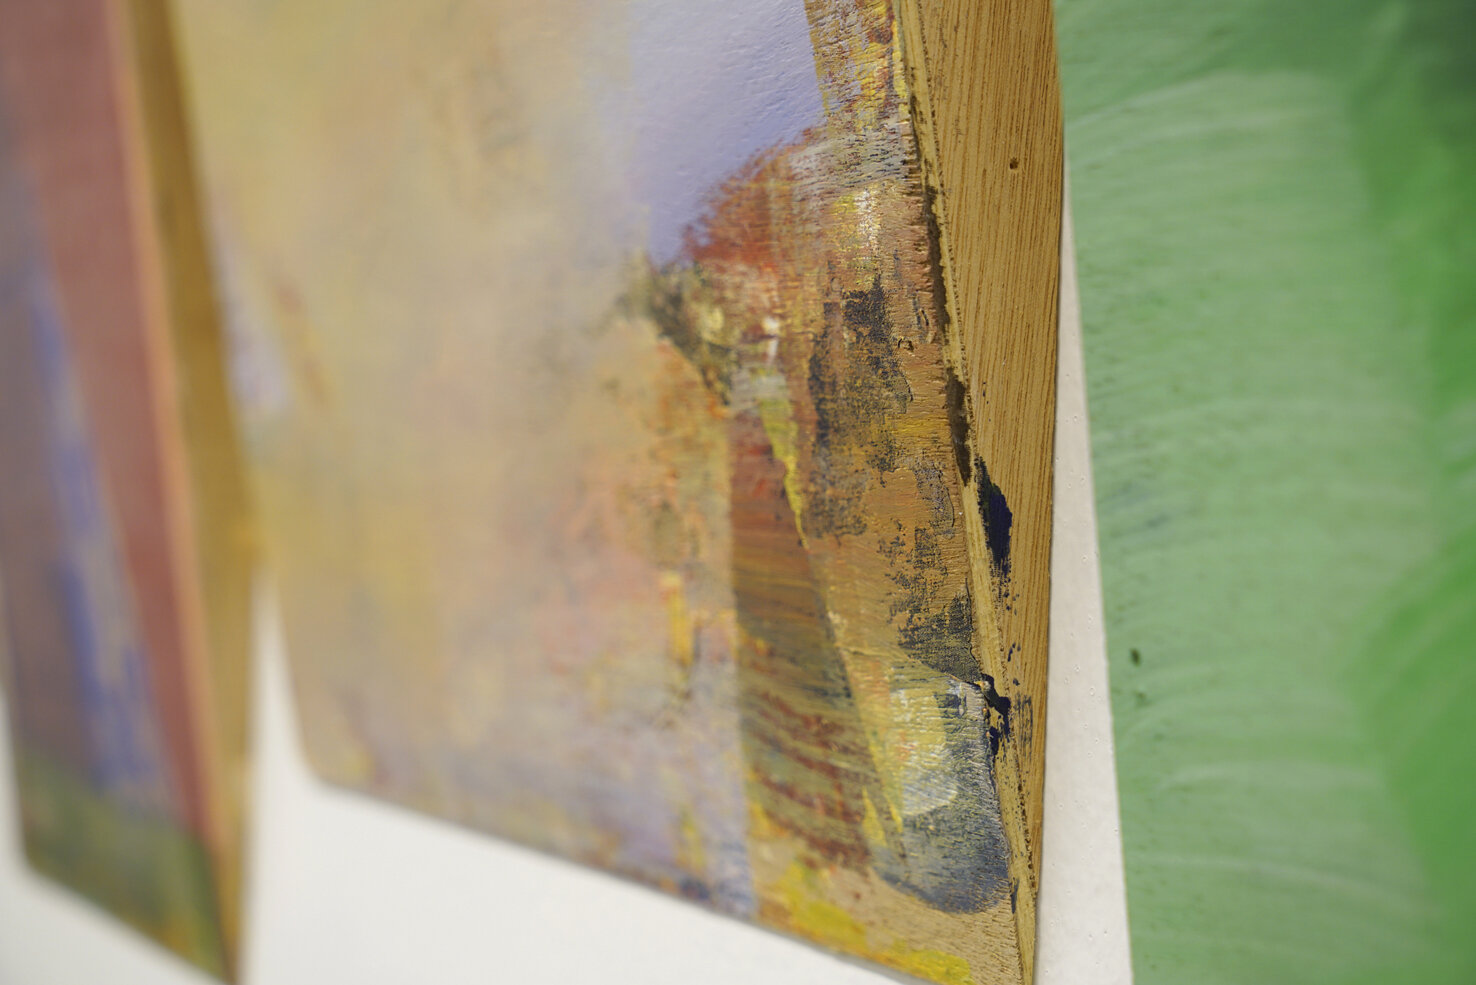   Emotional Things  2018 Acrylic on wood Dimensions variable Detail 